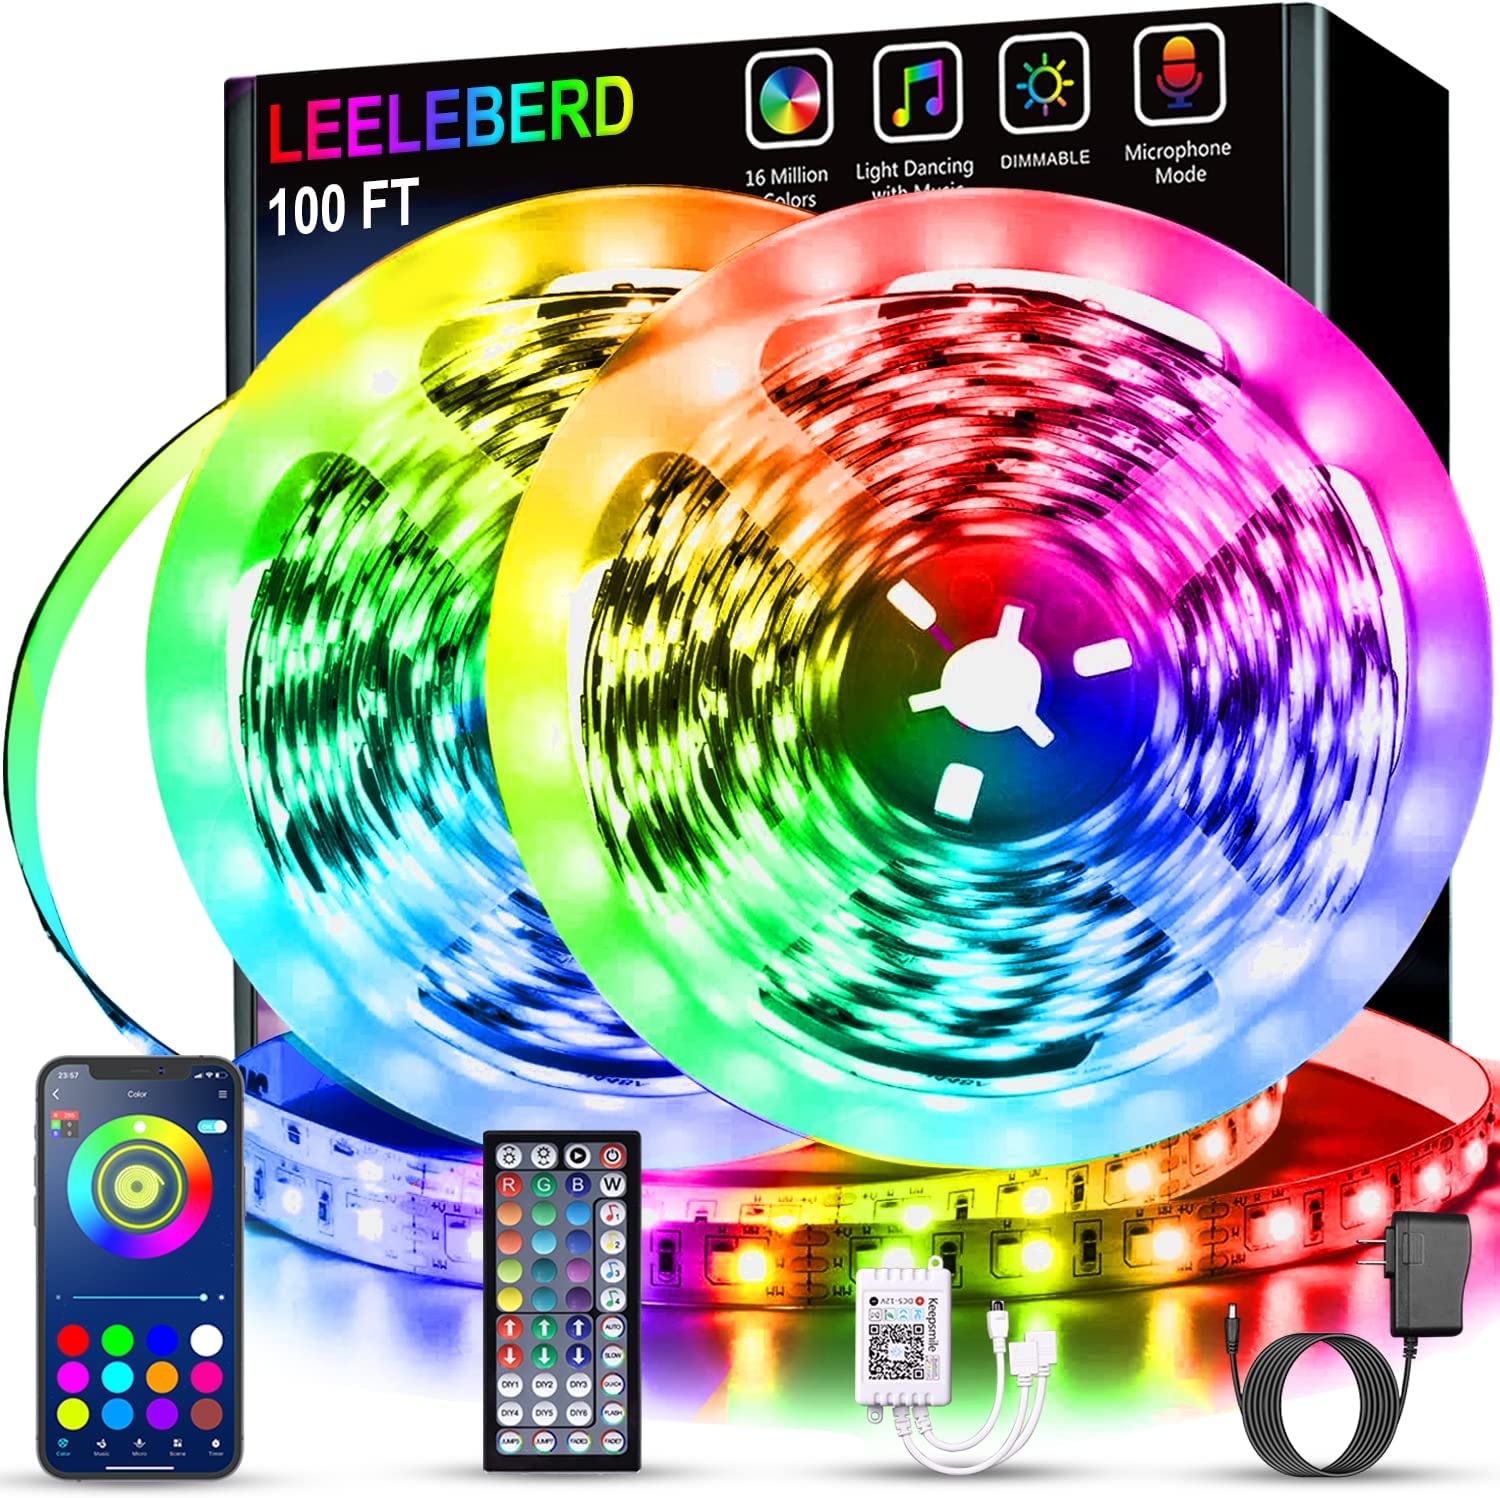 Energetic LED Strip Light 6.56ft for TV, 5050 RGB 16 Colors Changing Light  Strip with Remote, Monitor Backlight, 5V USB Powered